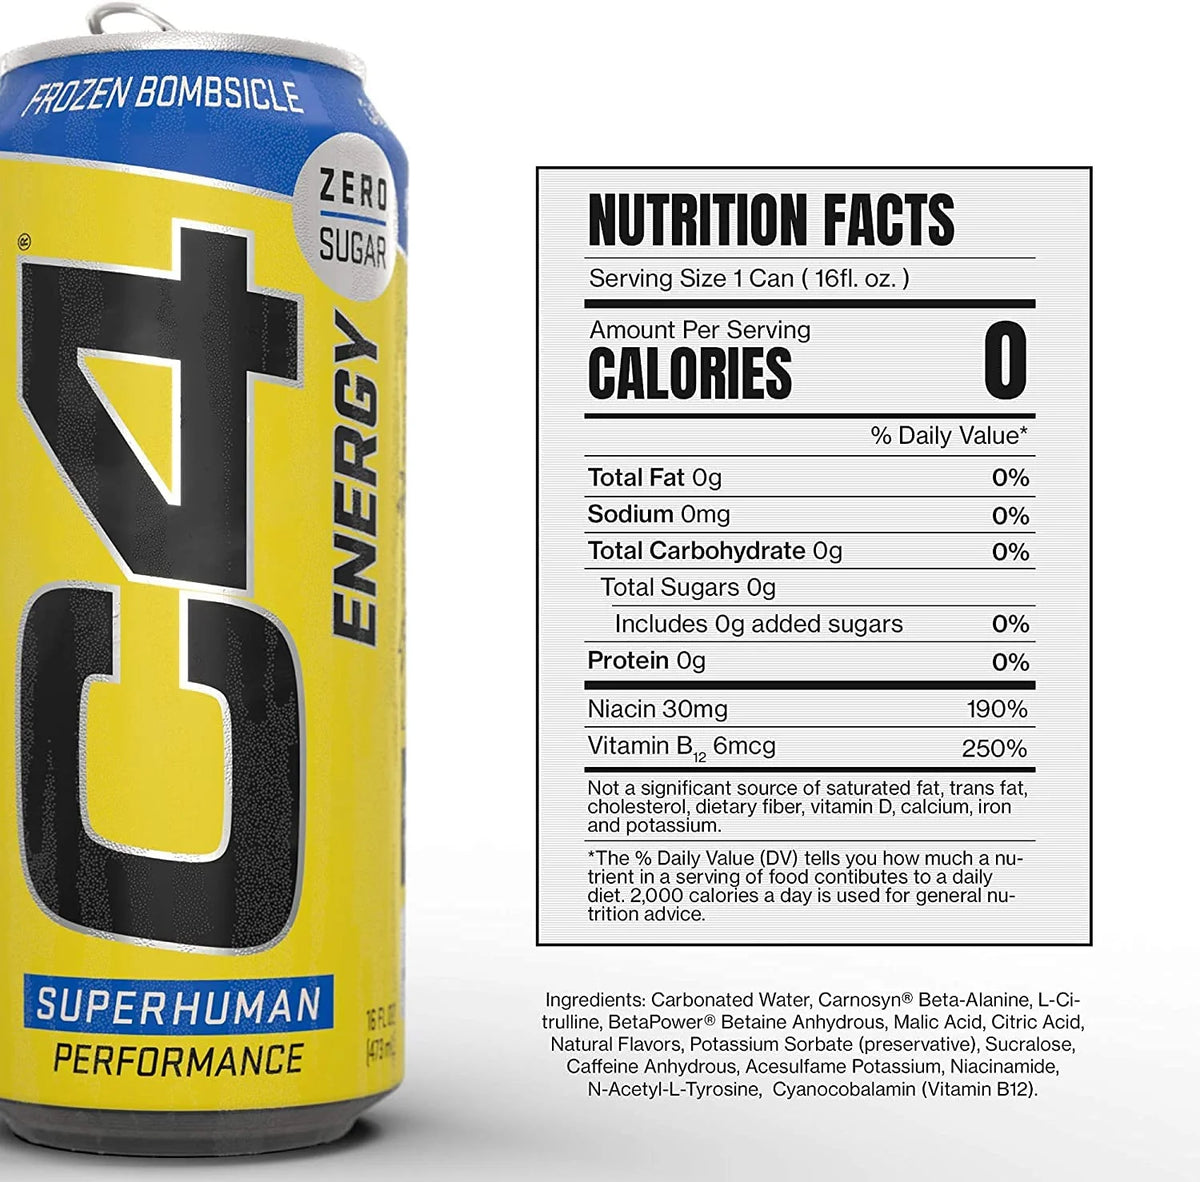 Cellucor - C4 Carbonated Energy Drink 473ml